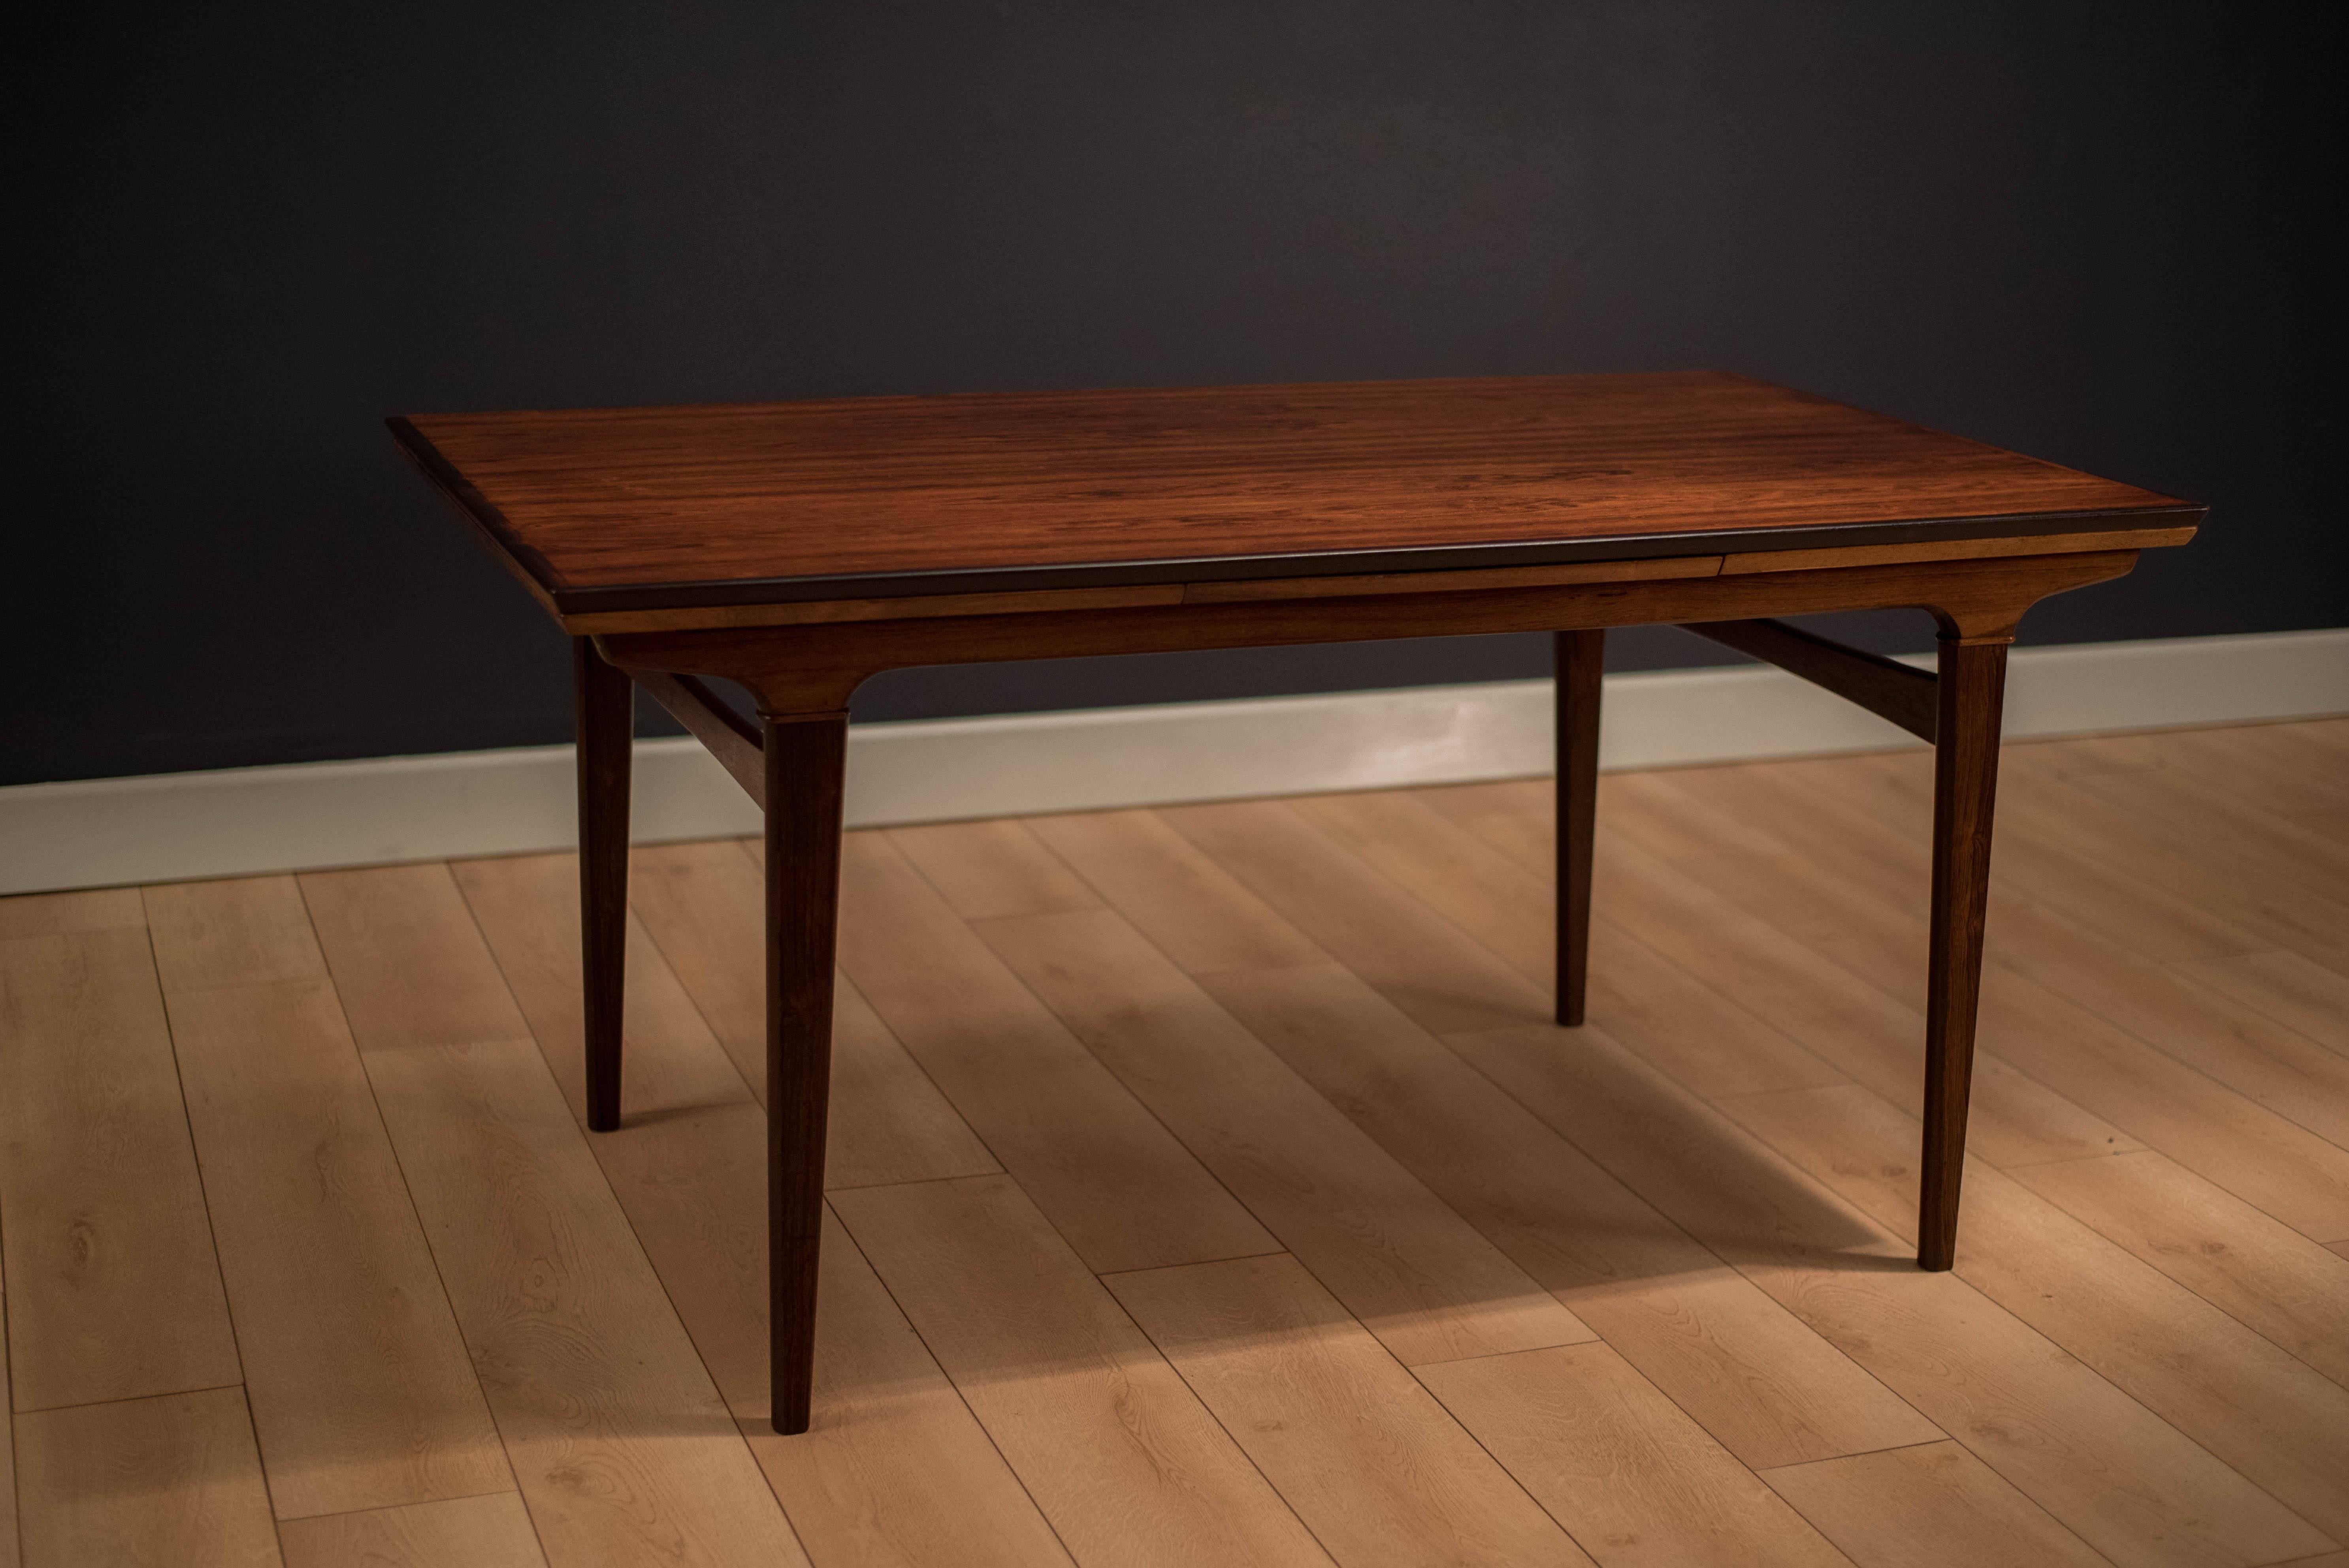 Danish modern expandable dining in Brazilian rosewood, circa 1960s. This piece features a gorgeous rosewood grain top with unique tapered legs. Extension leaves store underneath when not in use. 

Dimensions: 98